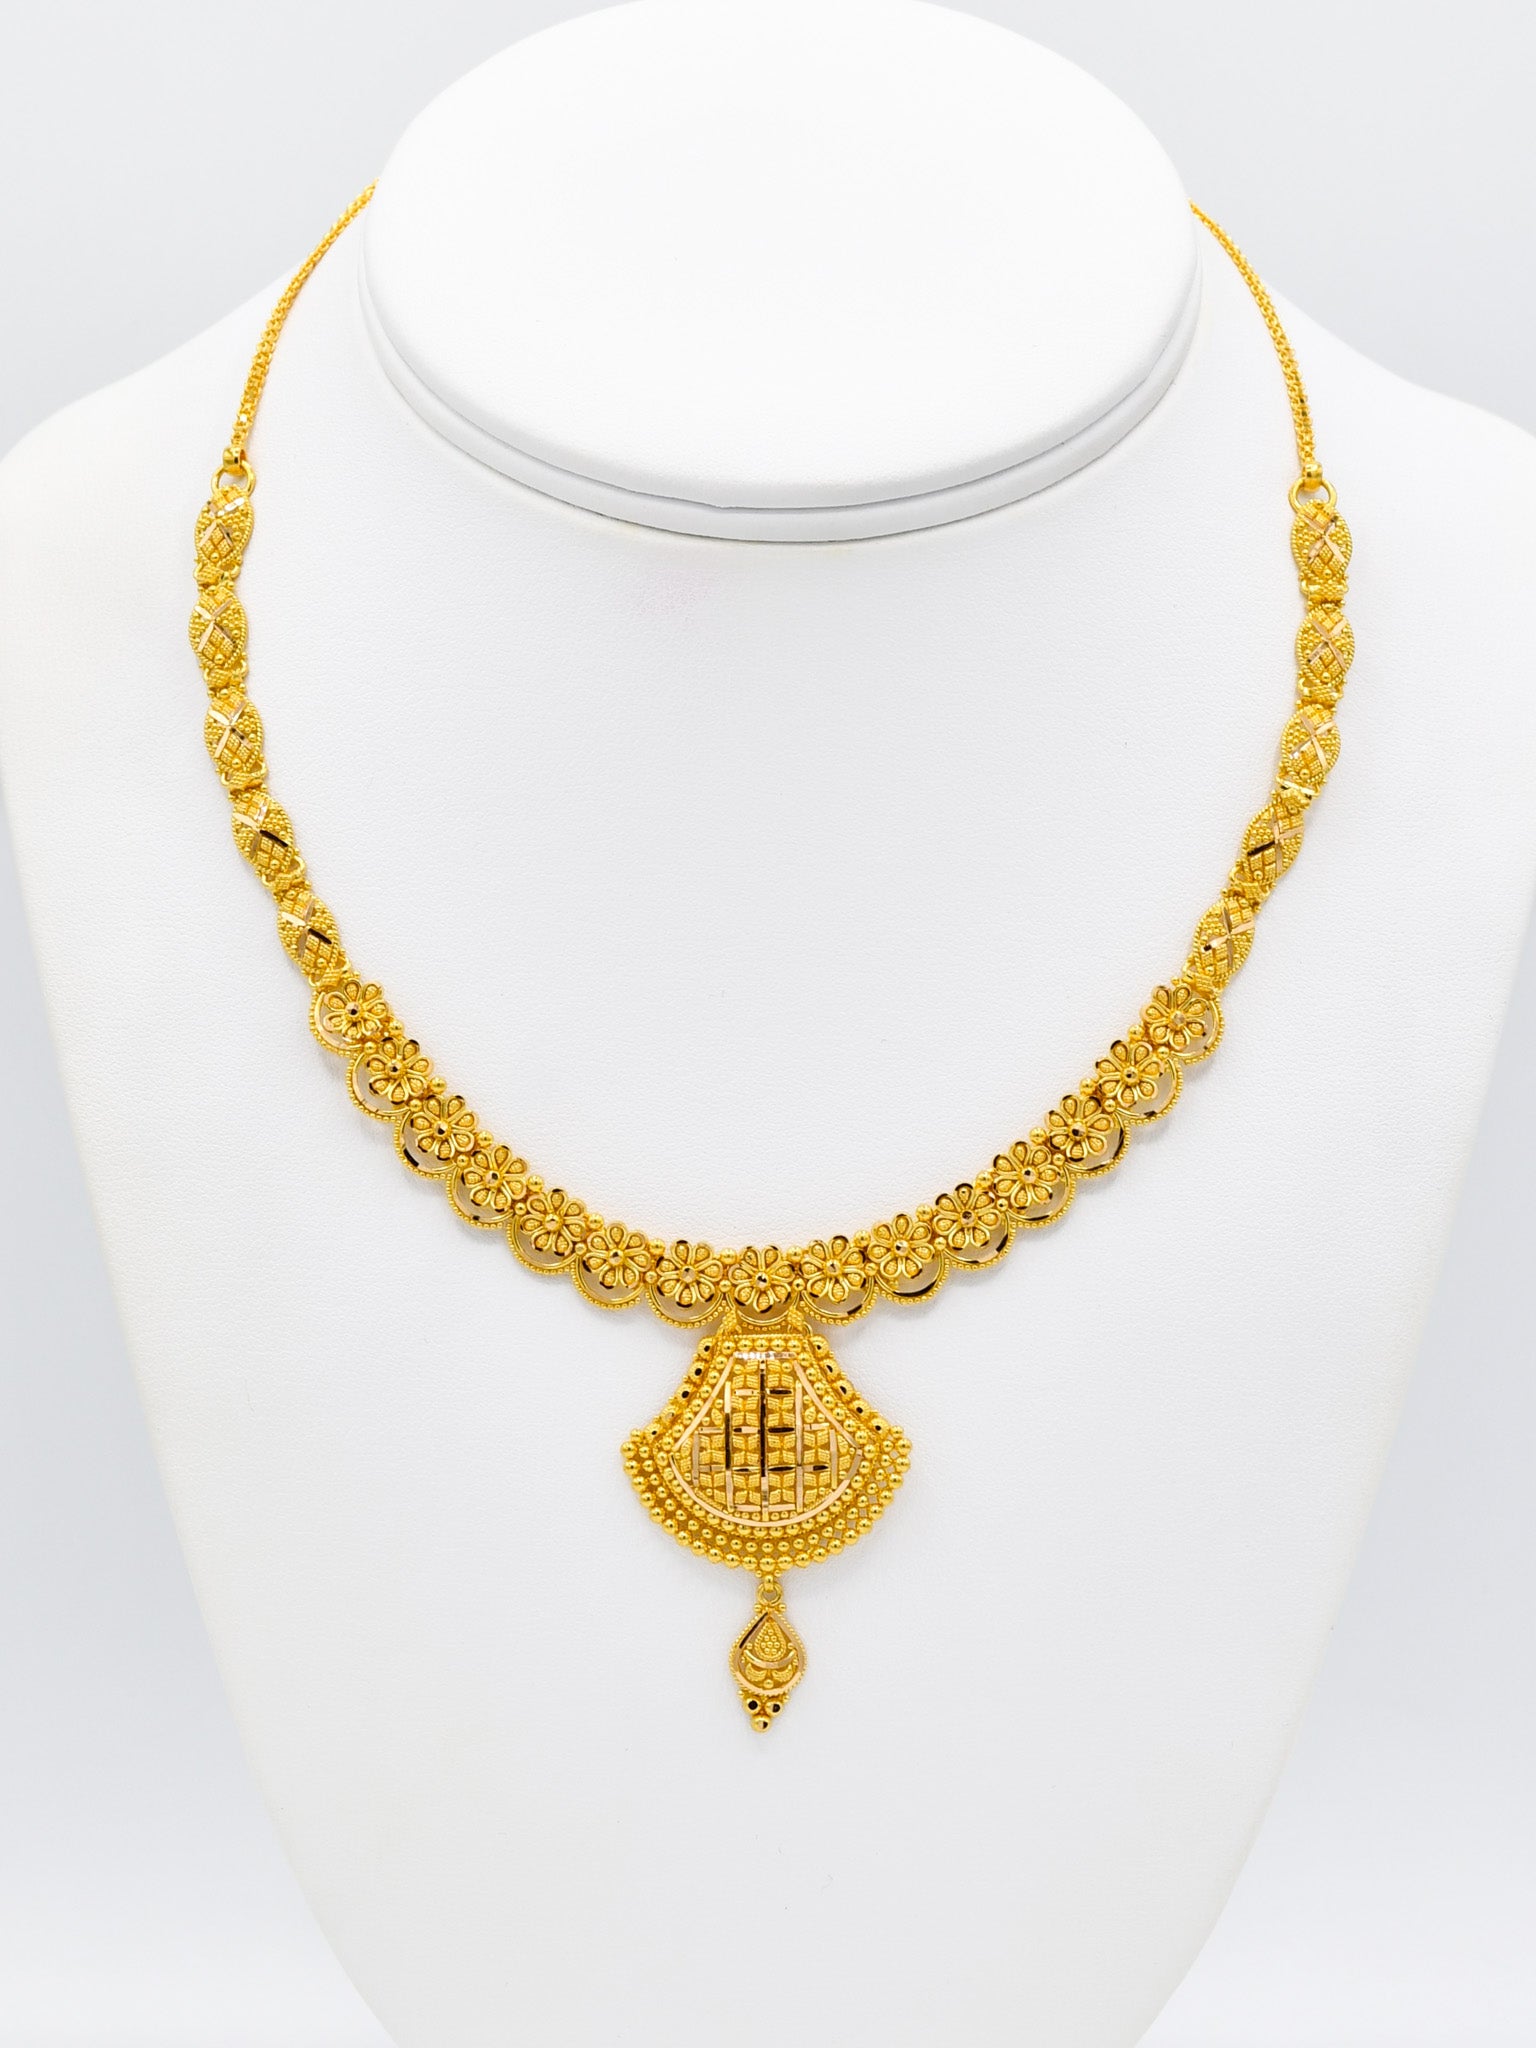 22Kt Gold Necklace Earring Set - stls27222 - US$ 12,259 - 22kt gold necklace  and earrings set is designed with filigree and handmade work.. Ghugirs at  the bot